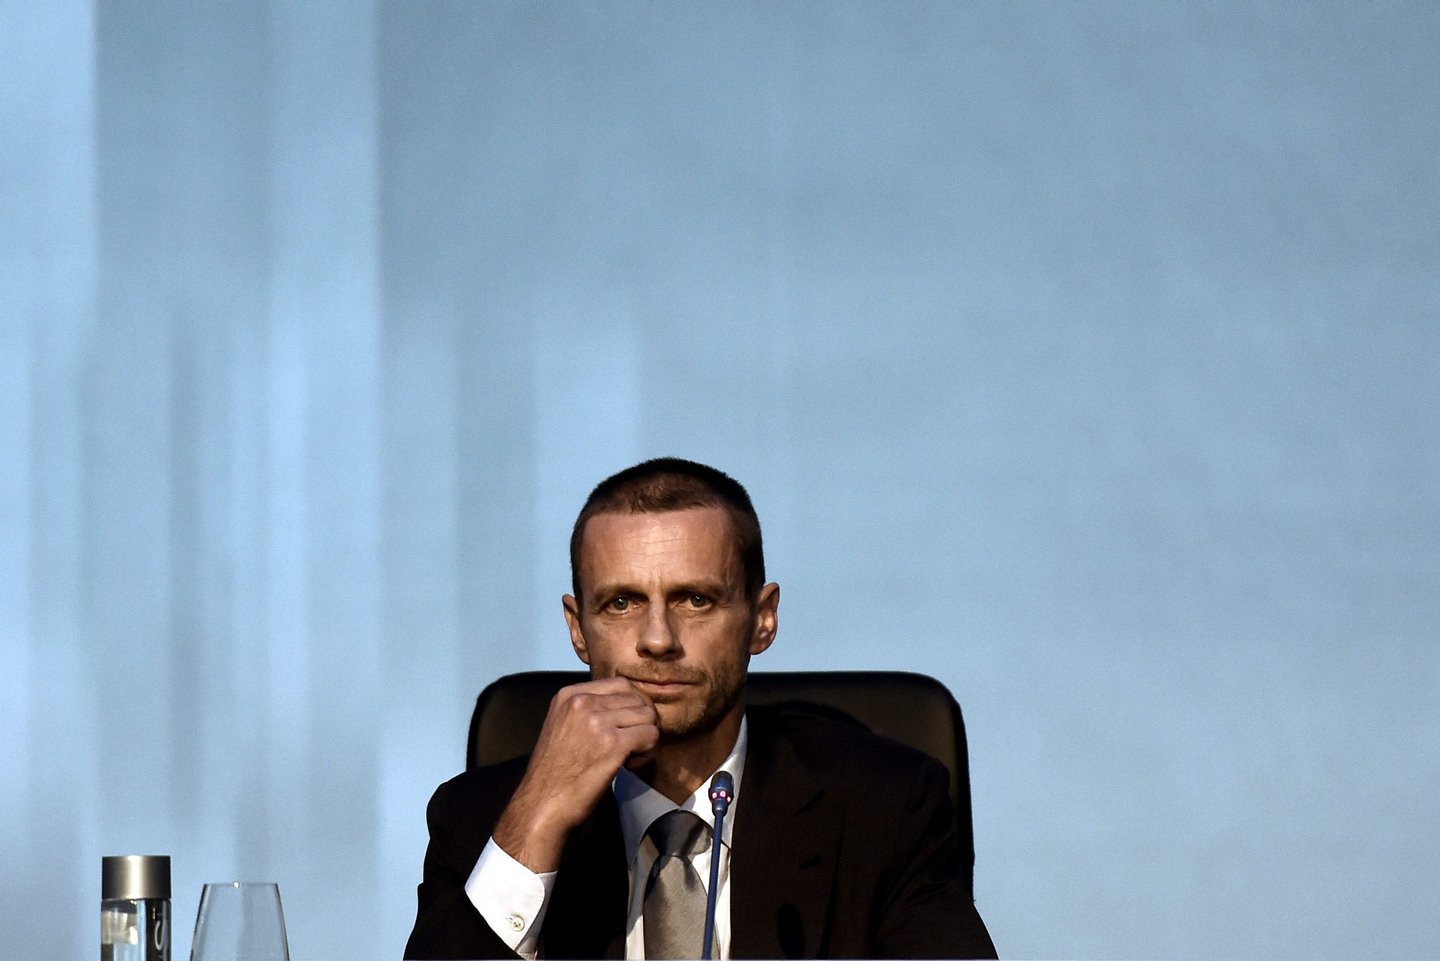 UEFA's newly elected President, Slovenian Aleksander Ceferin attends a press conference during the 12th Extraordinary UEFA congress and President election in Lagonisi, some 40 kilometers south of Athens on September 14, 2016. Disgraced football leader Michel Platini said on September 14 in a farewell speech to UEFA that he felt no guilt over a $2 million payment from FIFA that has seen him suspended for four years. / AFP / ARIS MESSINIS (Photo credit should read ARIS MESSINIS/AFP/Getty Images)